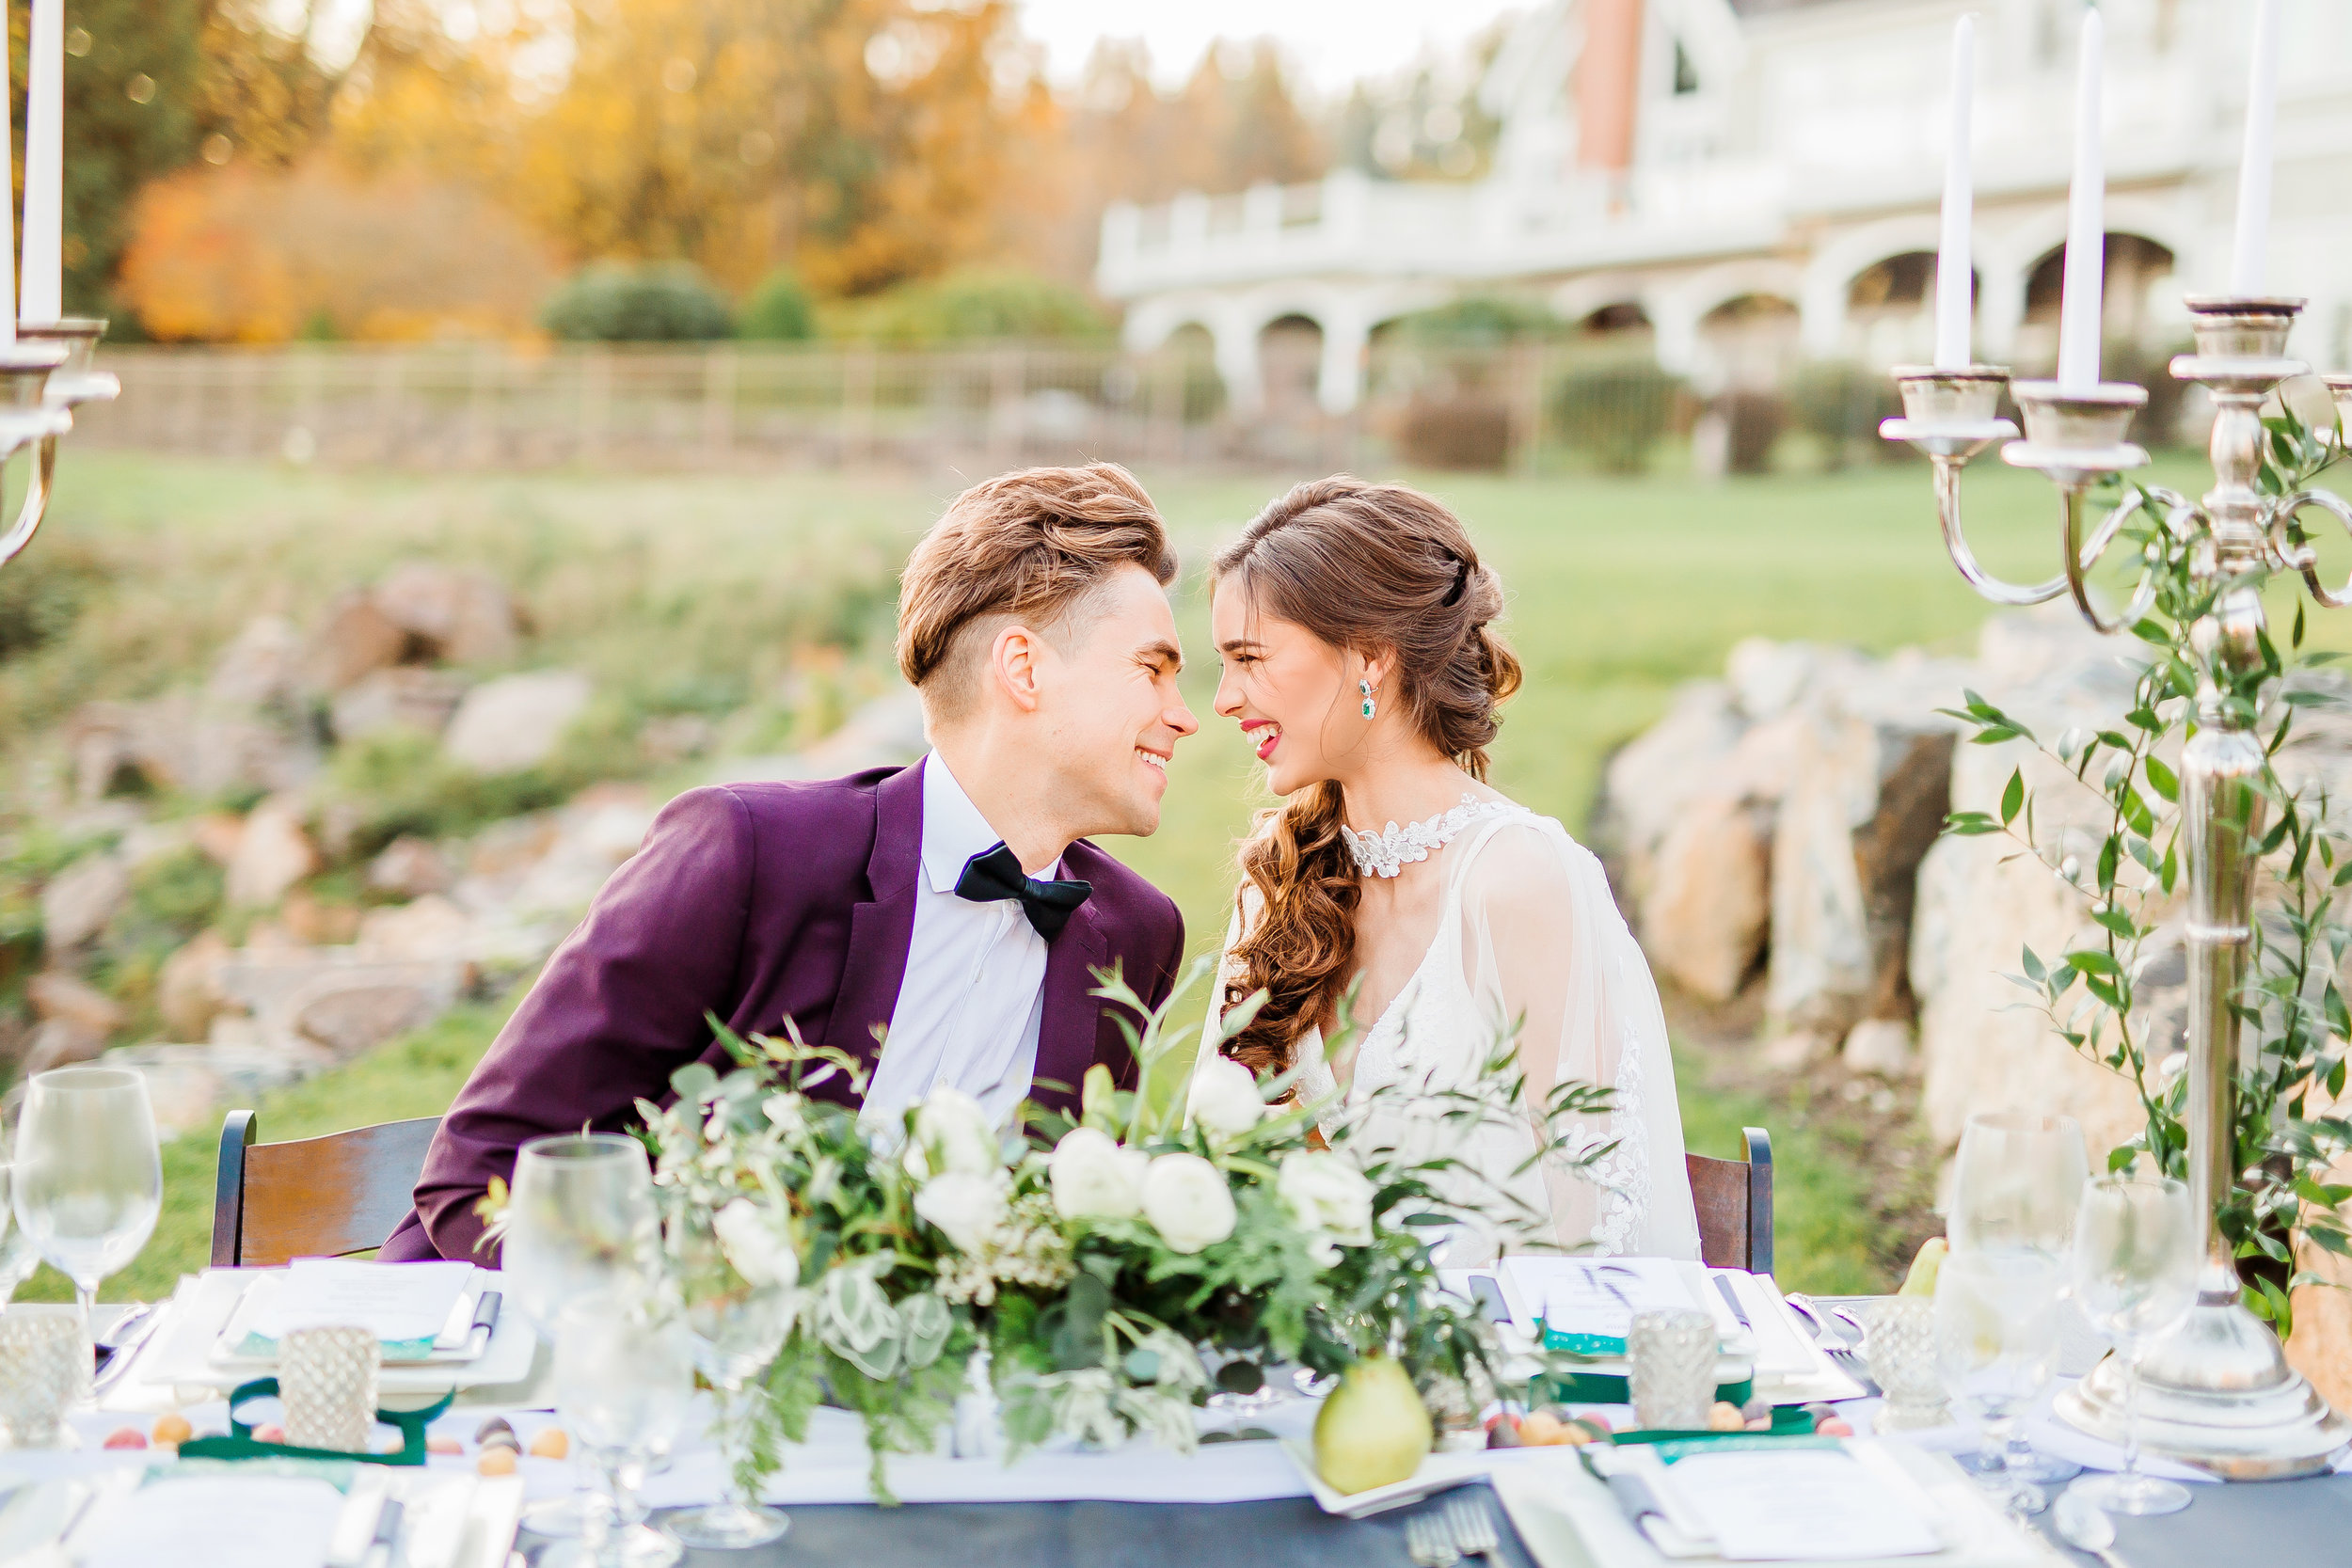 Styled Shoot Featured on Pacific Coast Weddings